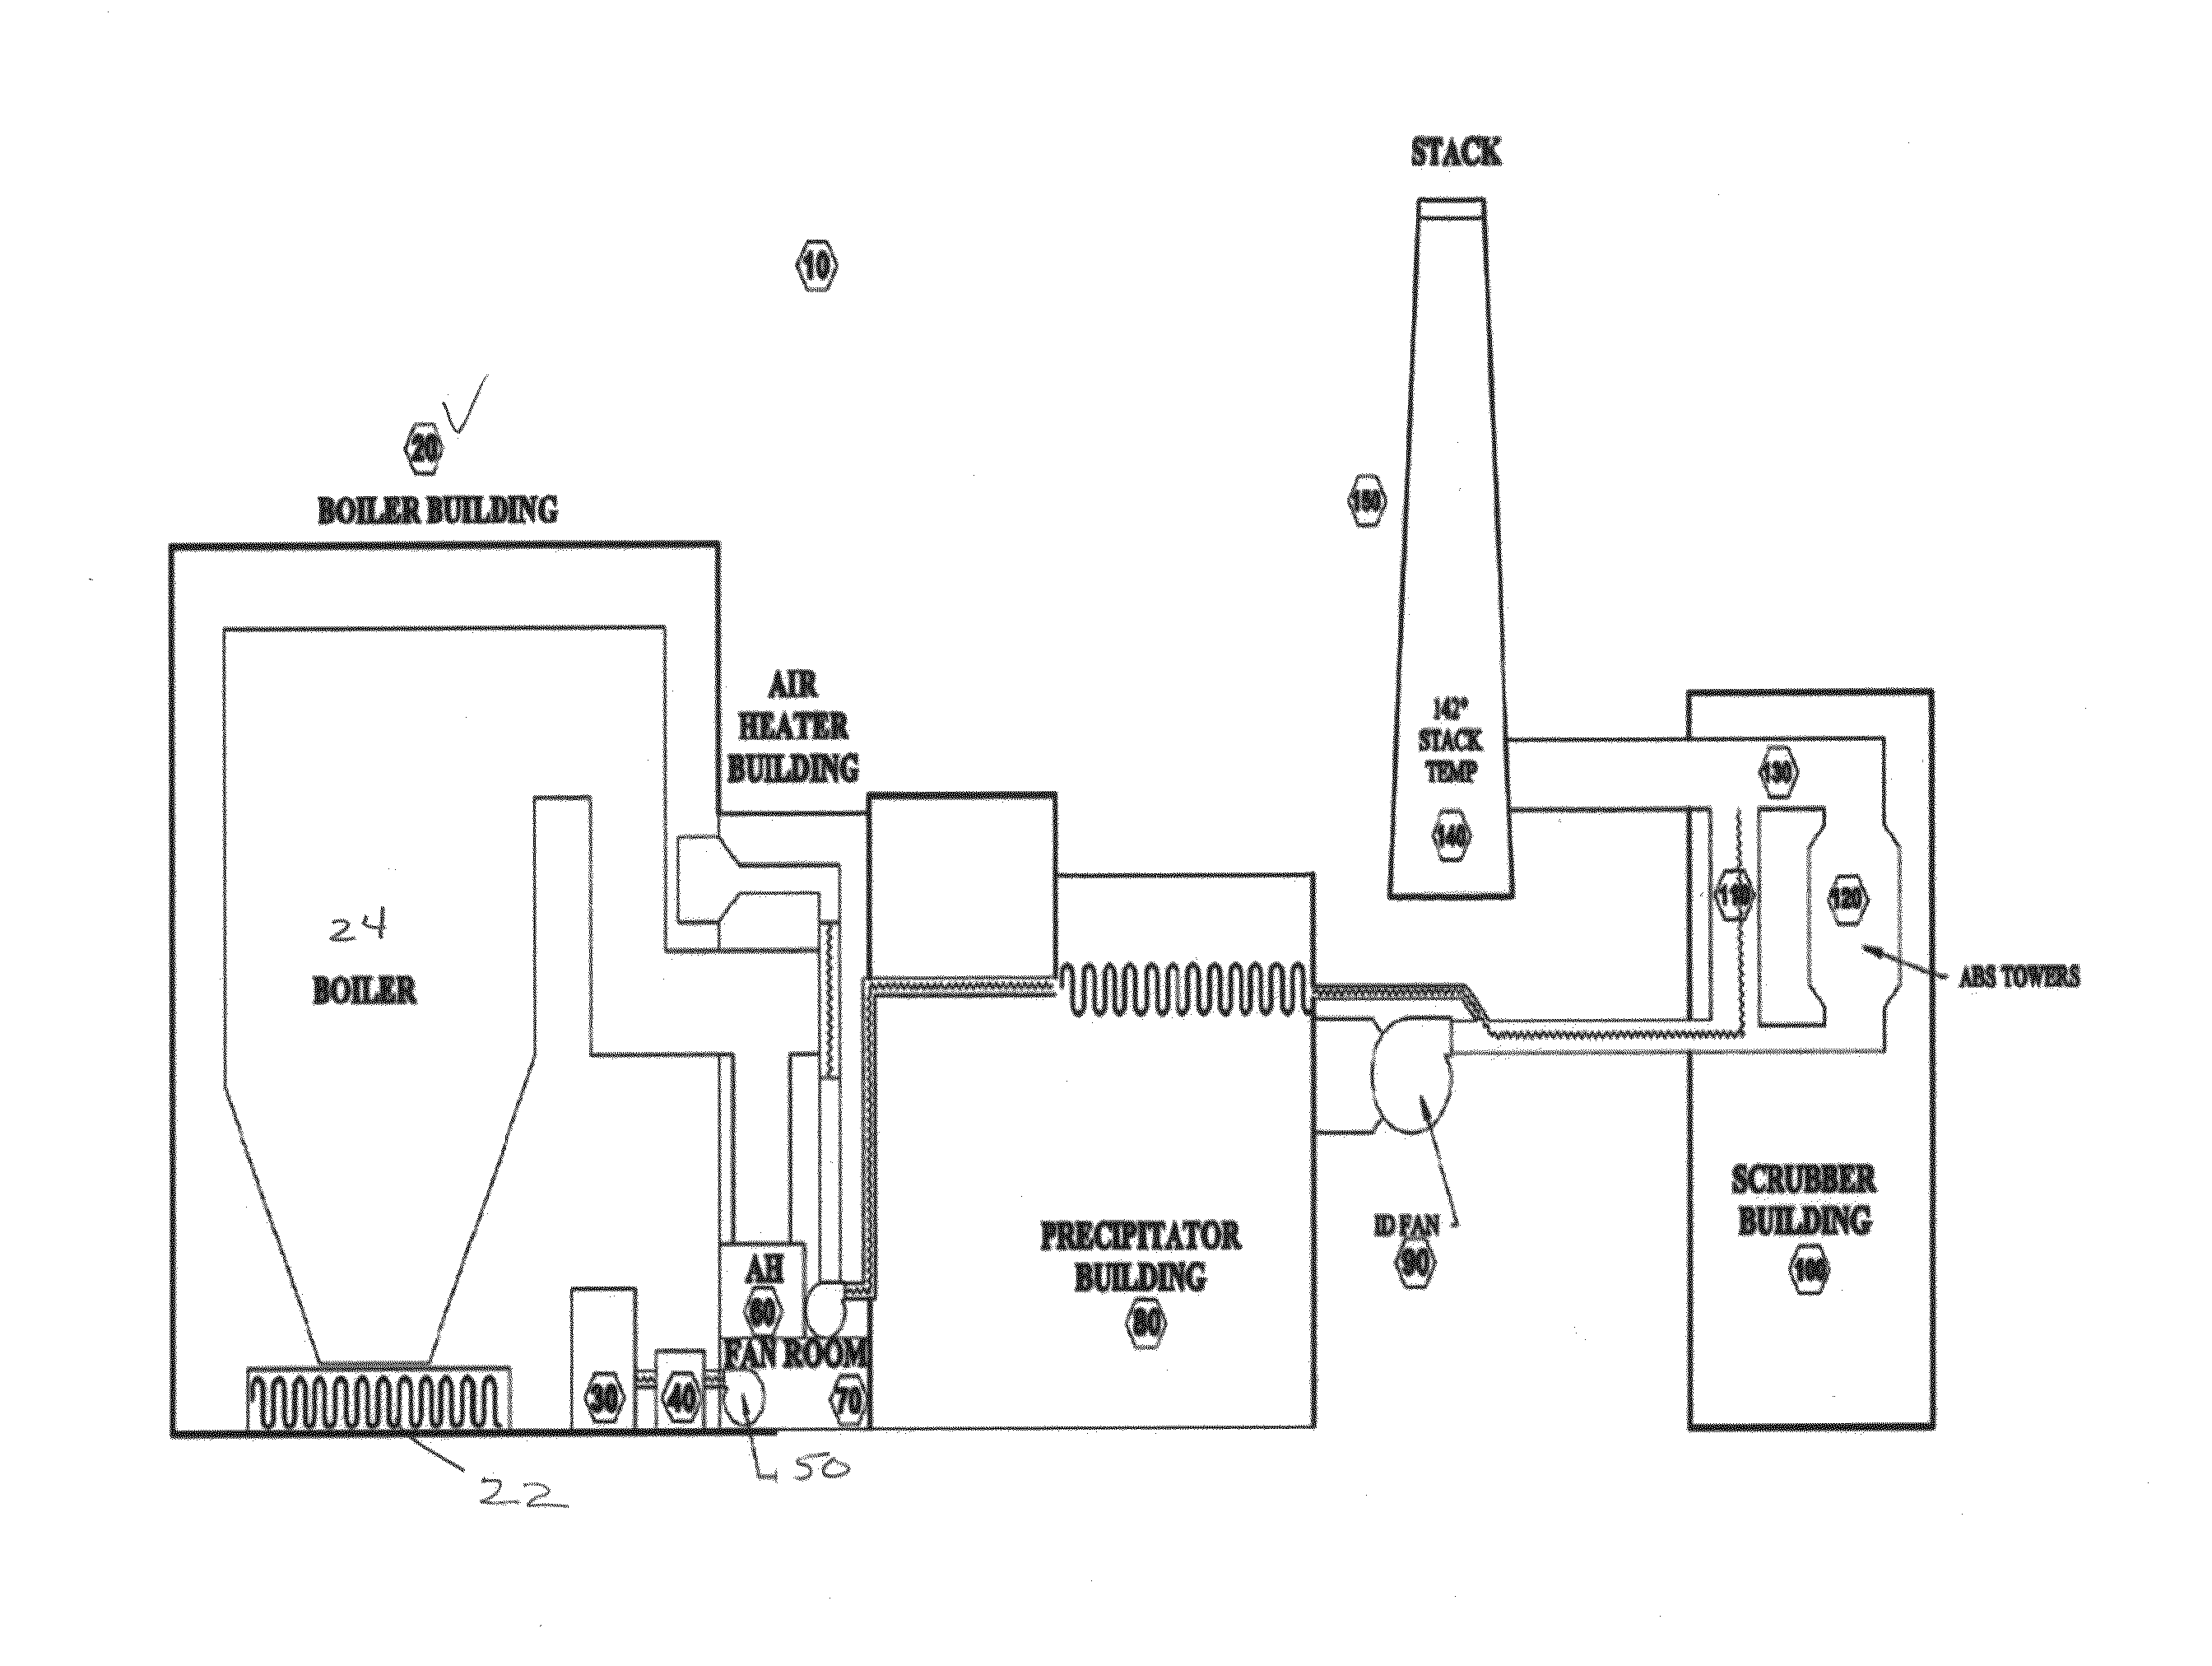 Method and system for reheating flue gas using waste heat to maintain dry chimney stack operation